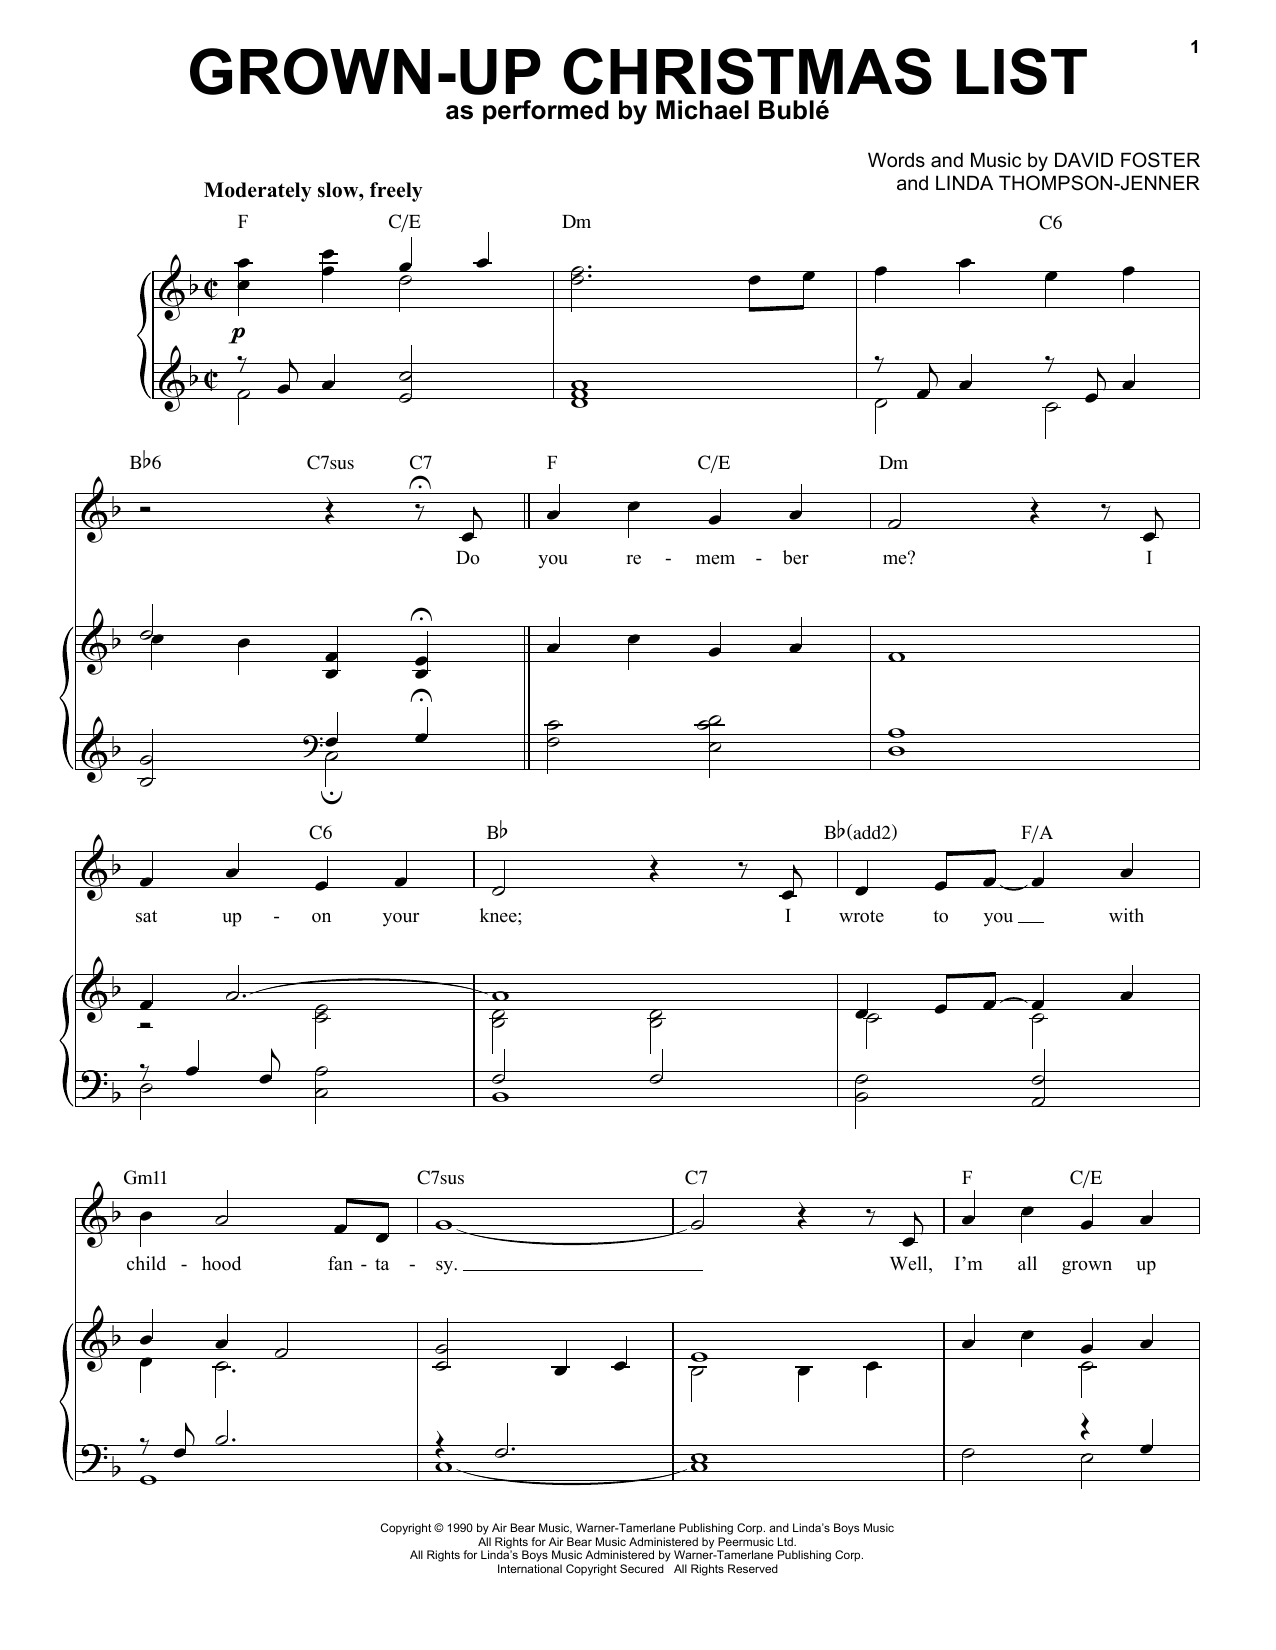 Download Michael Buble Grown-Up Christmas List Sheet Music